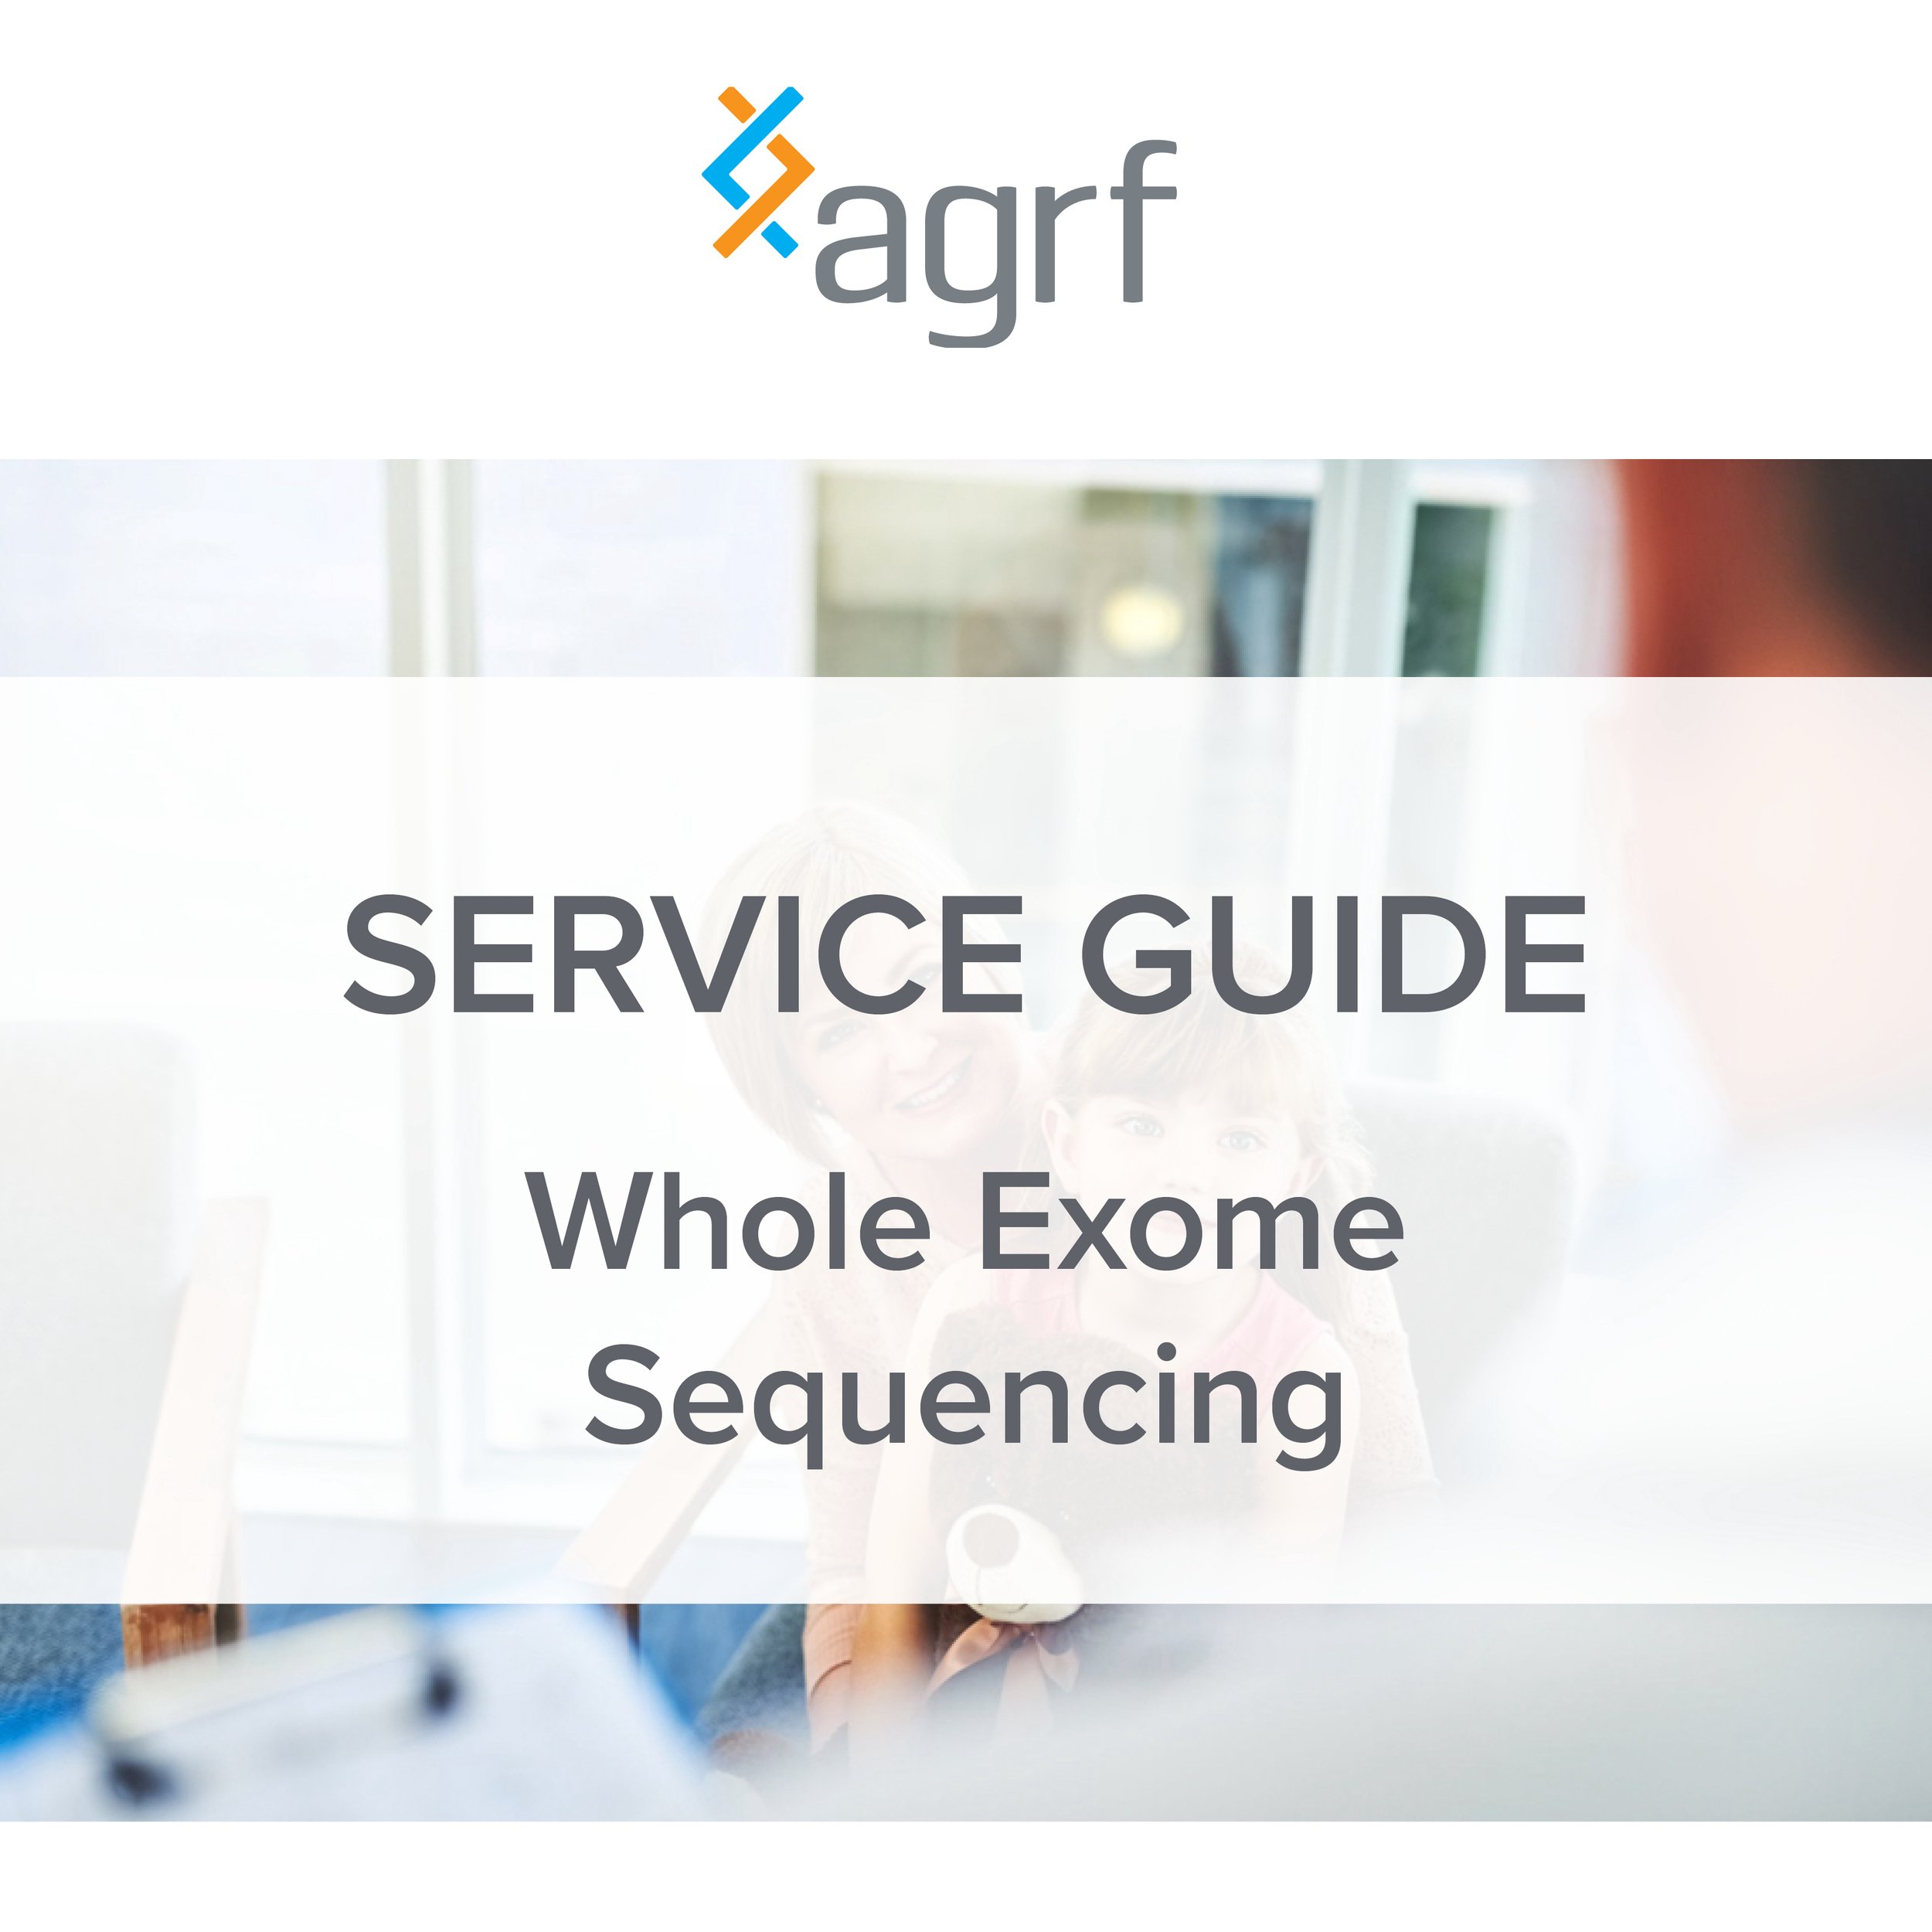 Web Tile_Whole Exome Sequencing.jpg